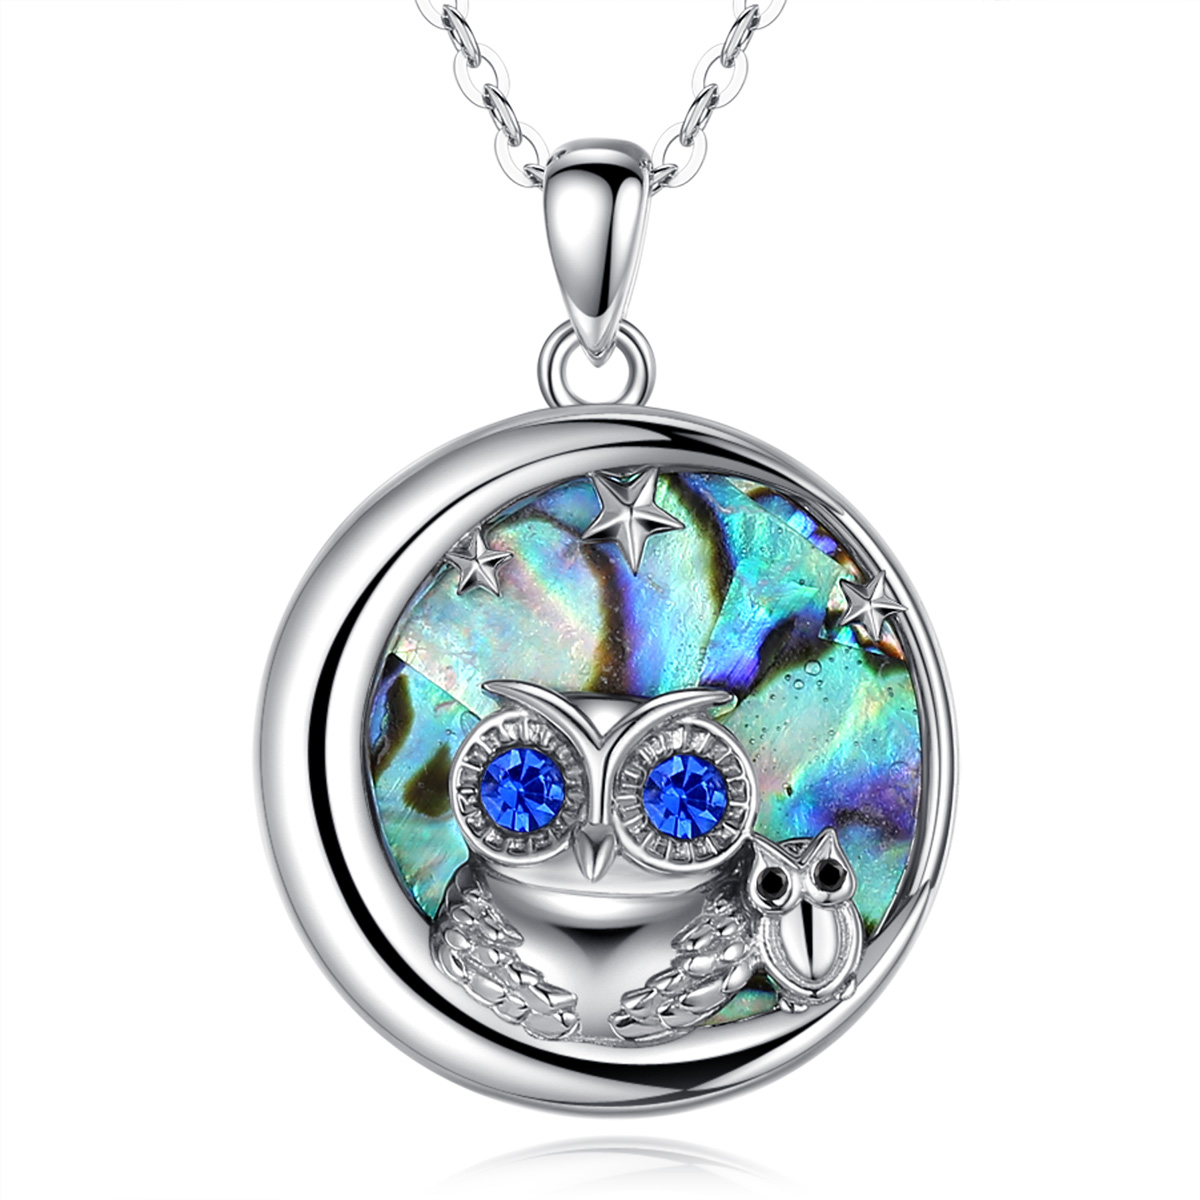 Merryshine Jewelry Owl Necklace Animal Sterling Silver Plated White Gold Abalone Shell Owl Necklace For Christmas Gift